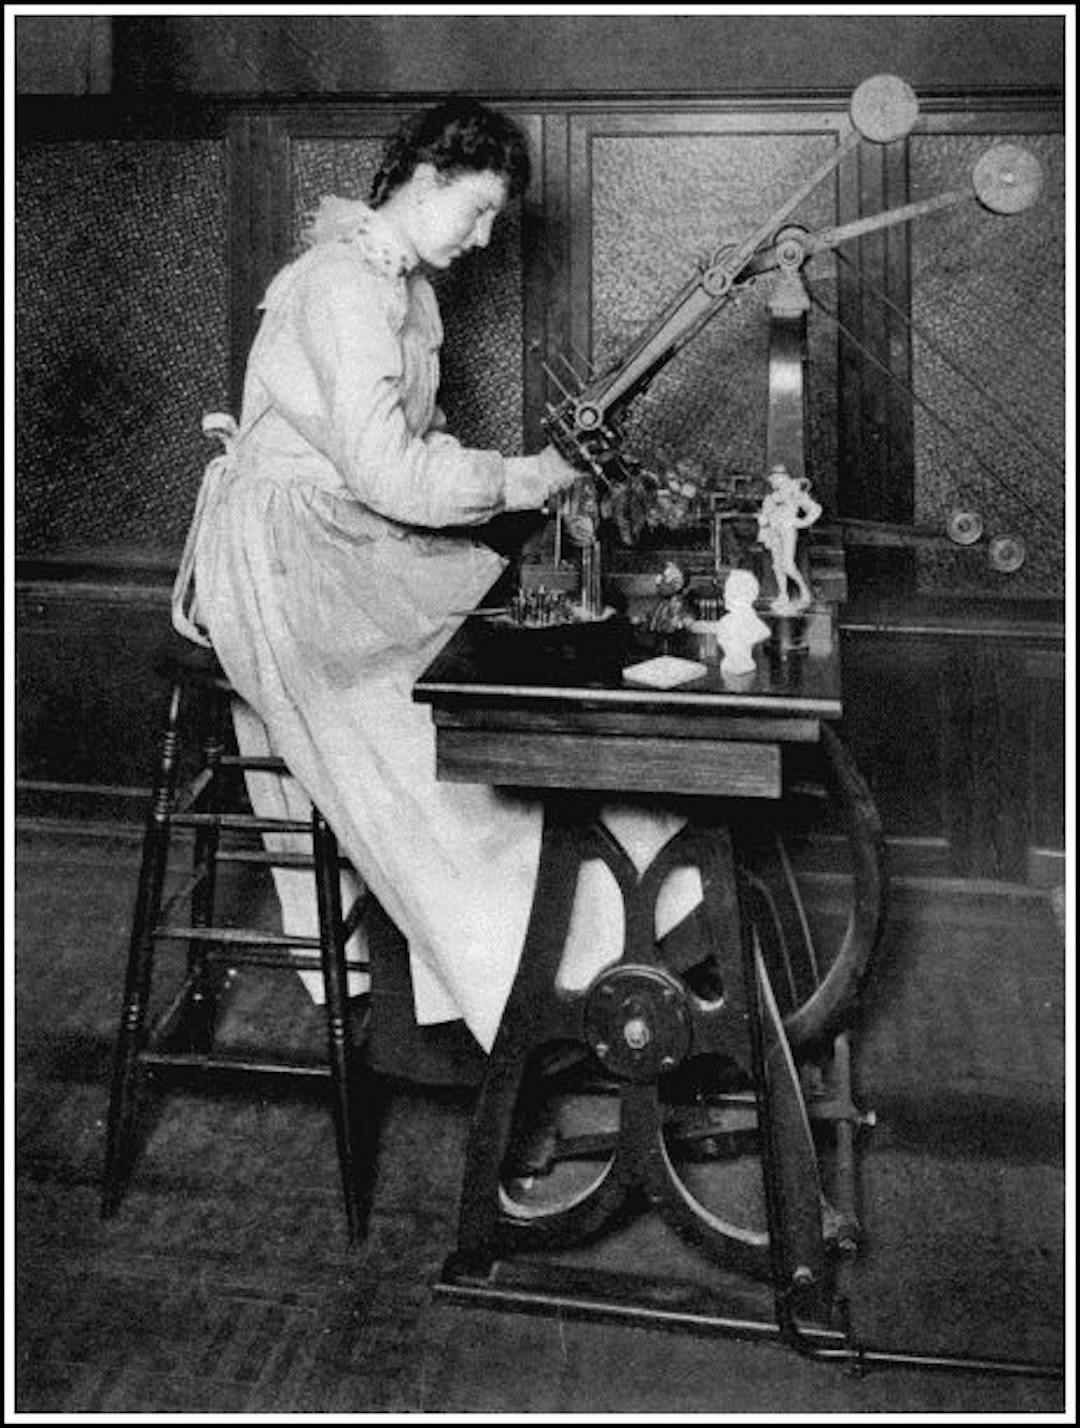 A SMALL WENZEL AUTOMATIC SCULPTURING MACHINE
This cuts statuettes, two at a time, out of stone or wood, the cutters being guided by a pointer passed over the surface of the model by the girl.